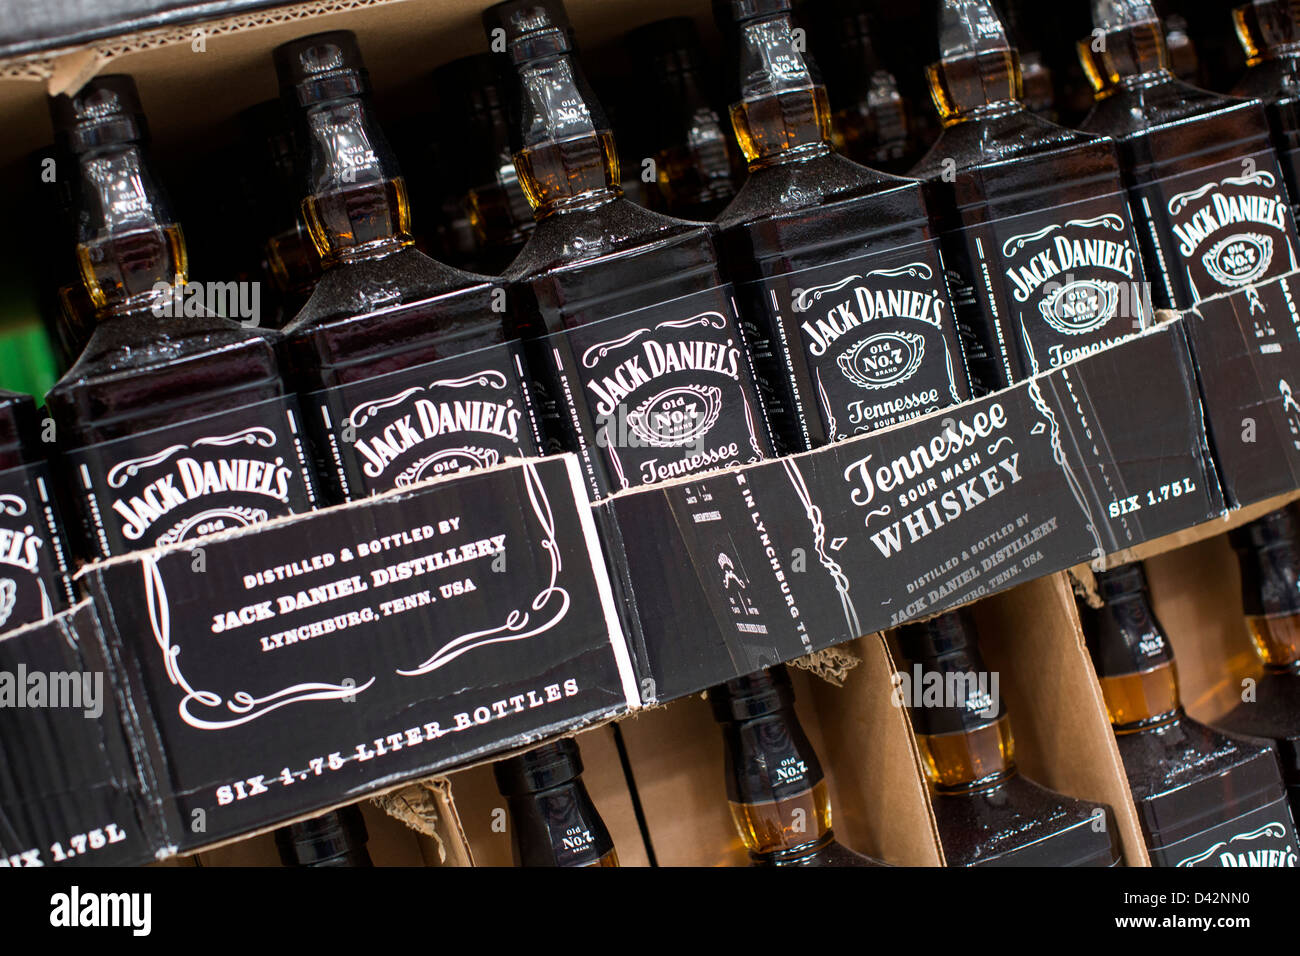 Jack Daniel's whiskey on display at a Costco Wholesale Warehouse Club. Stock Photo